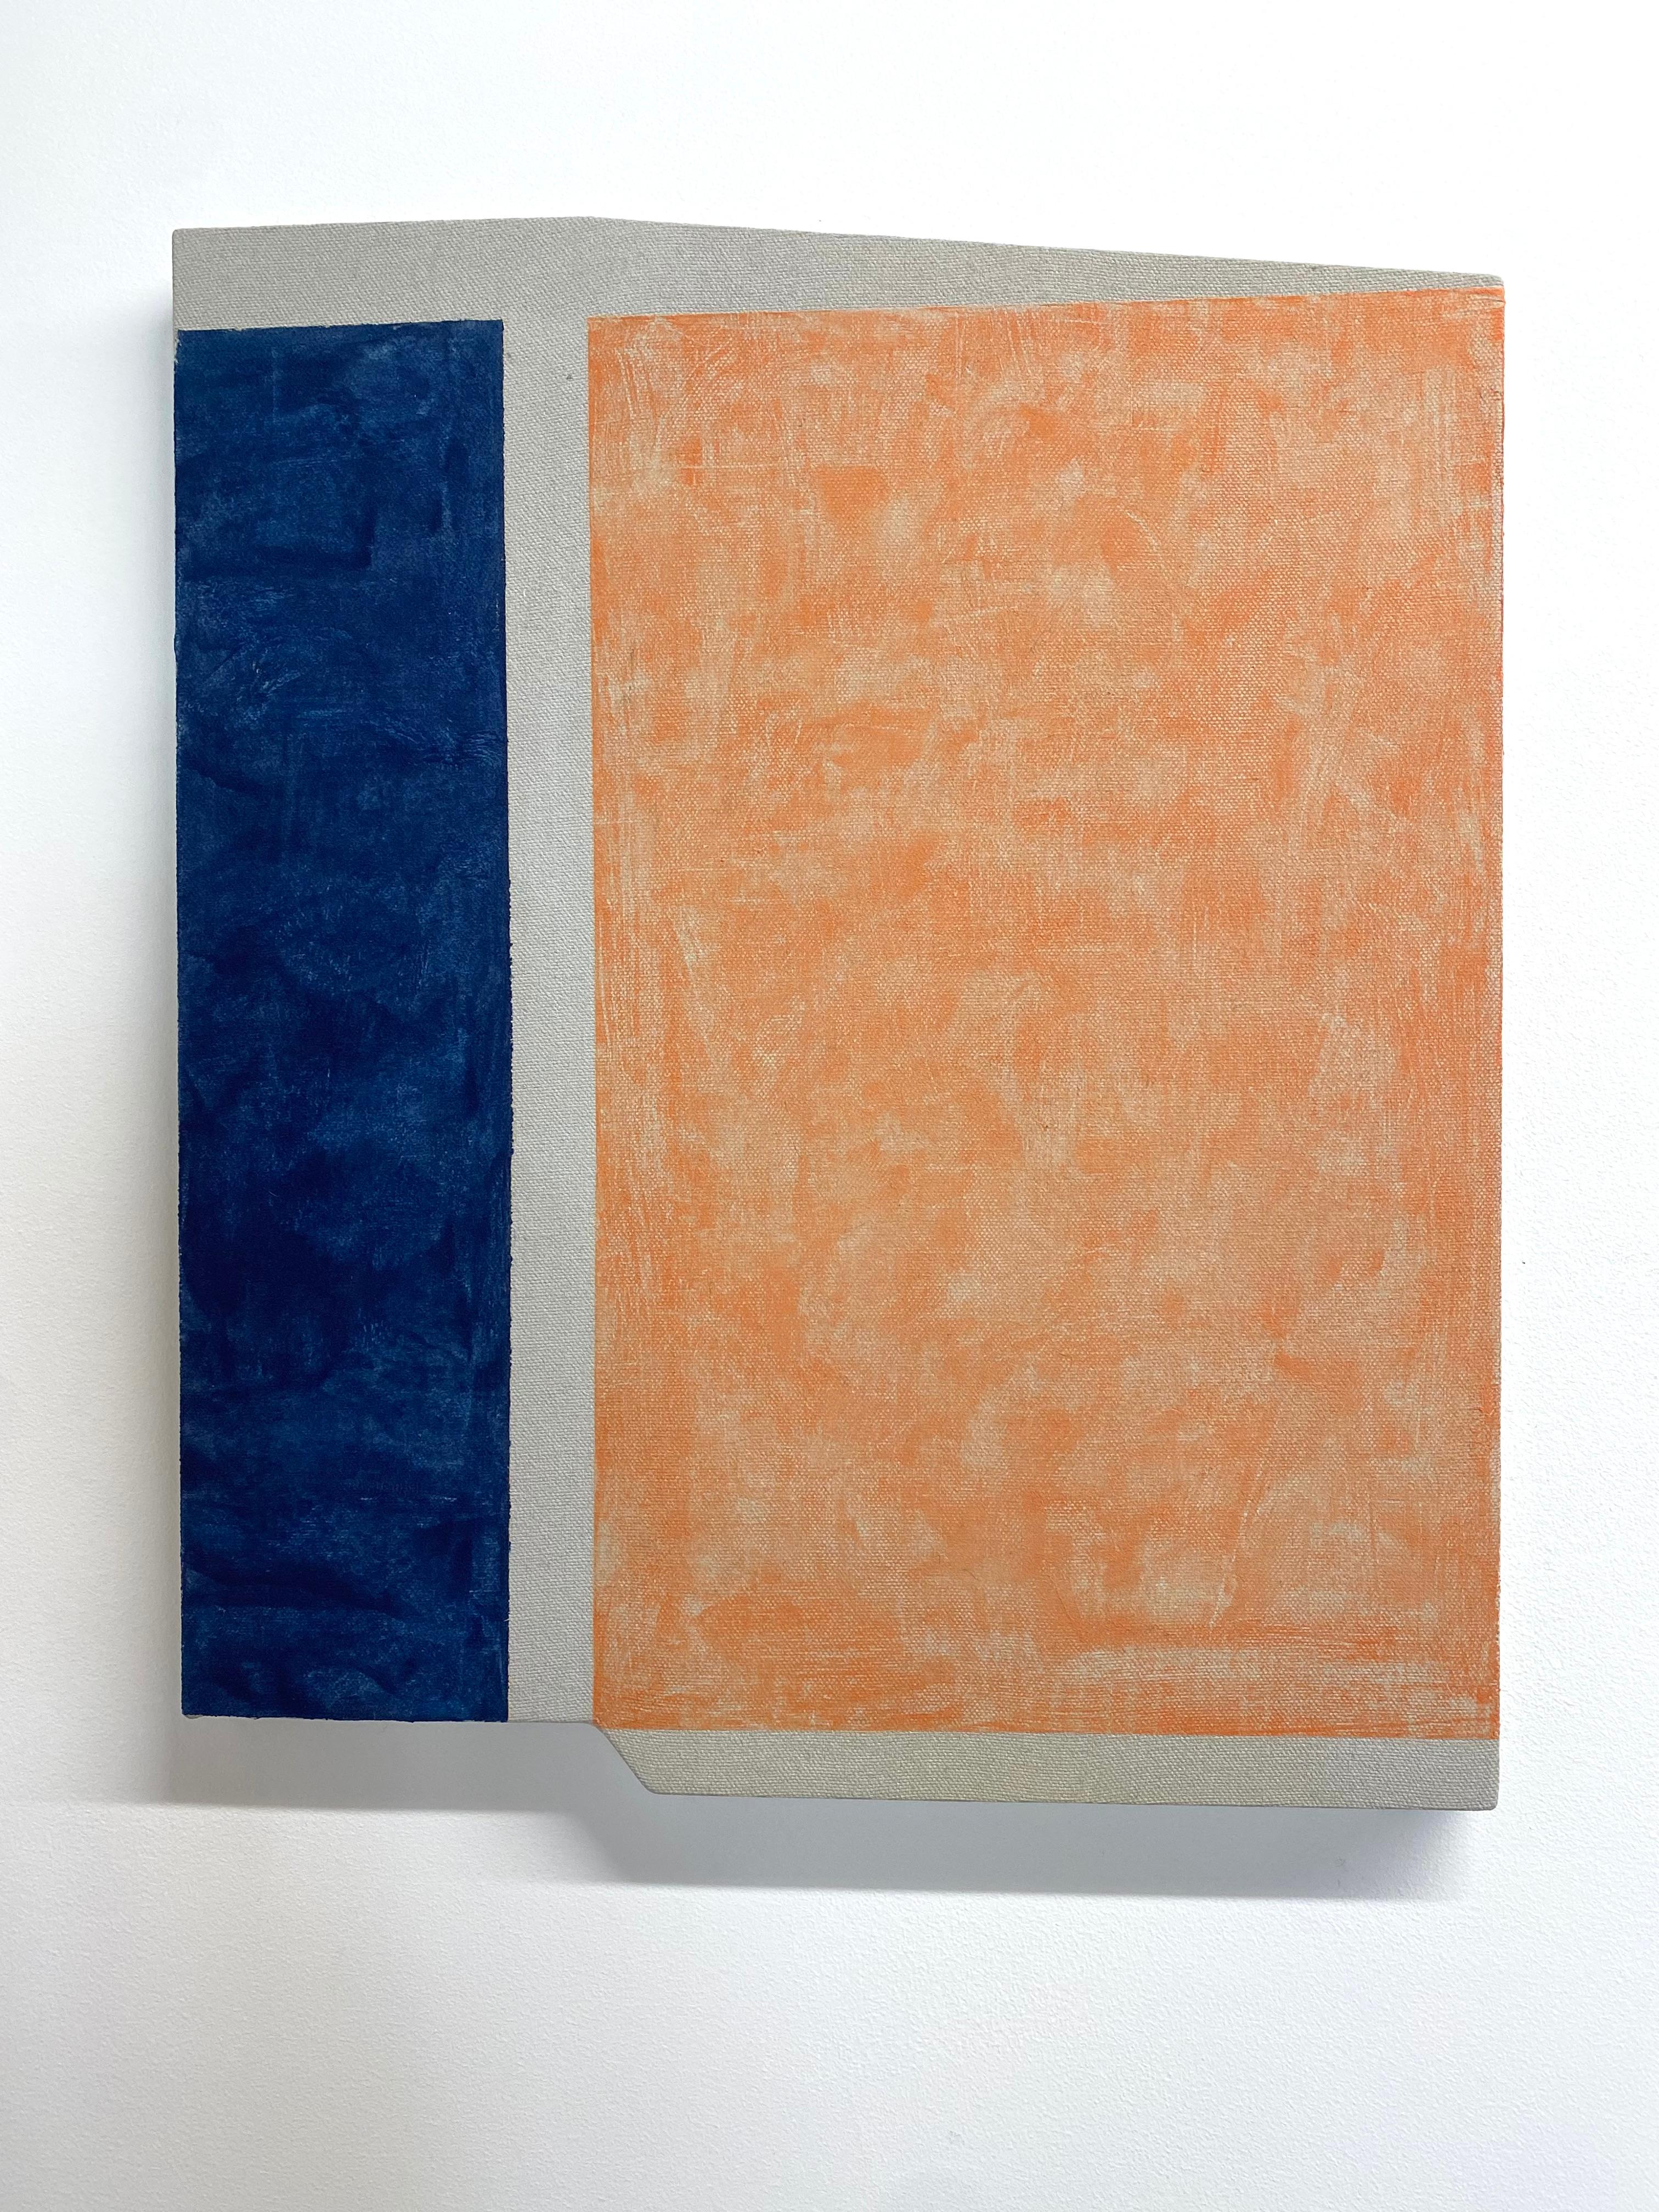 Two vertical blocks of color in dark lapis blue and soft, mottled orange are luminous against thinner neutral sections of exposed linen in this painting on a shaped panel. Signed, dated and titled on verso.

Elizabeth Gourlay’s work is a meditation